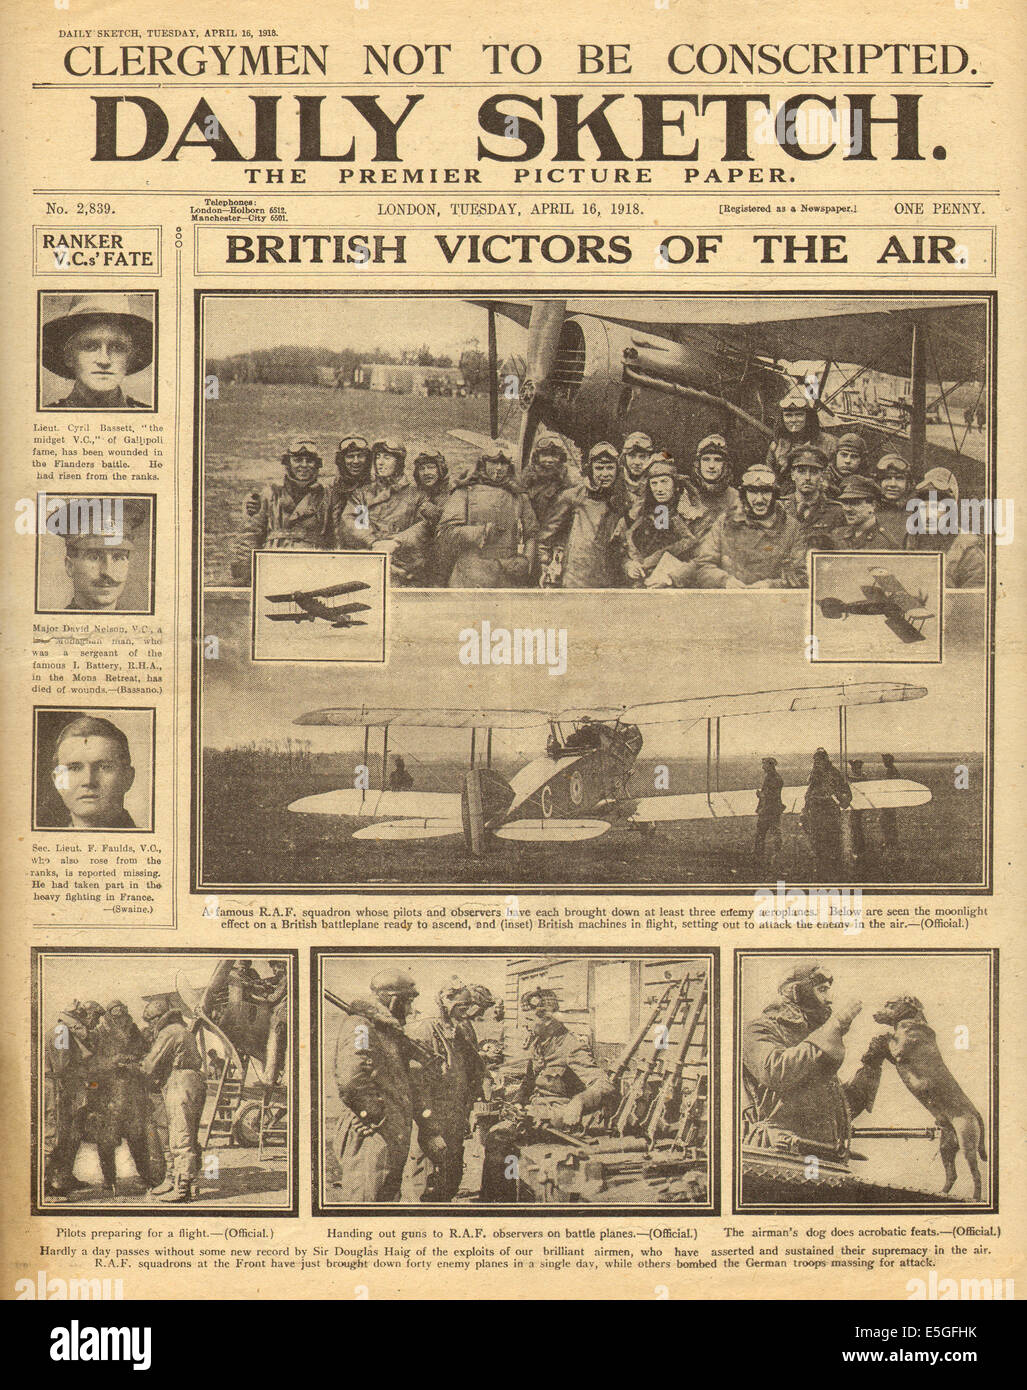 1918 Daily Sketch front page reporting the new Royal Air Force Stock Photo